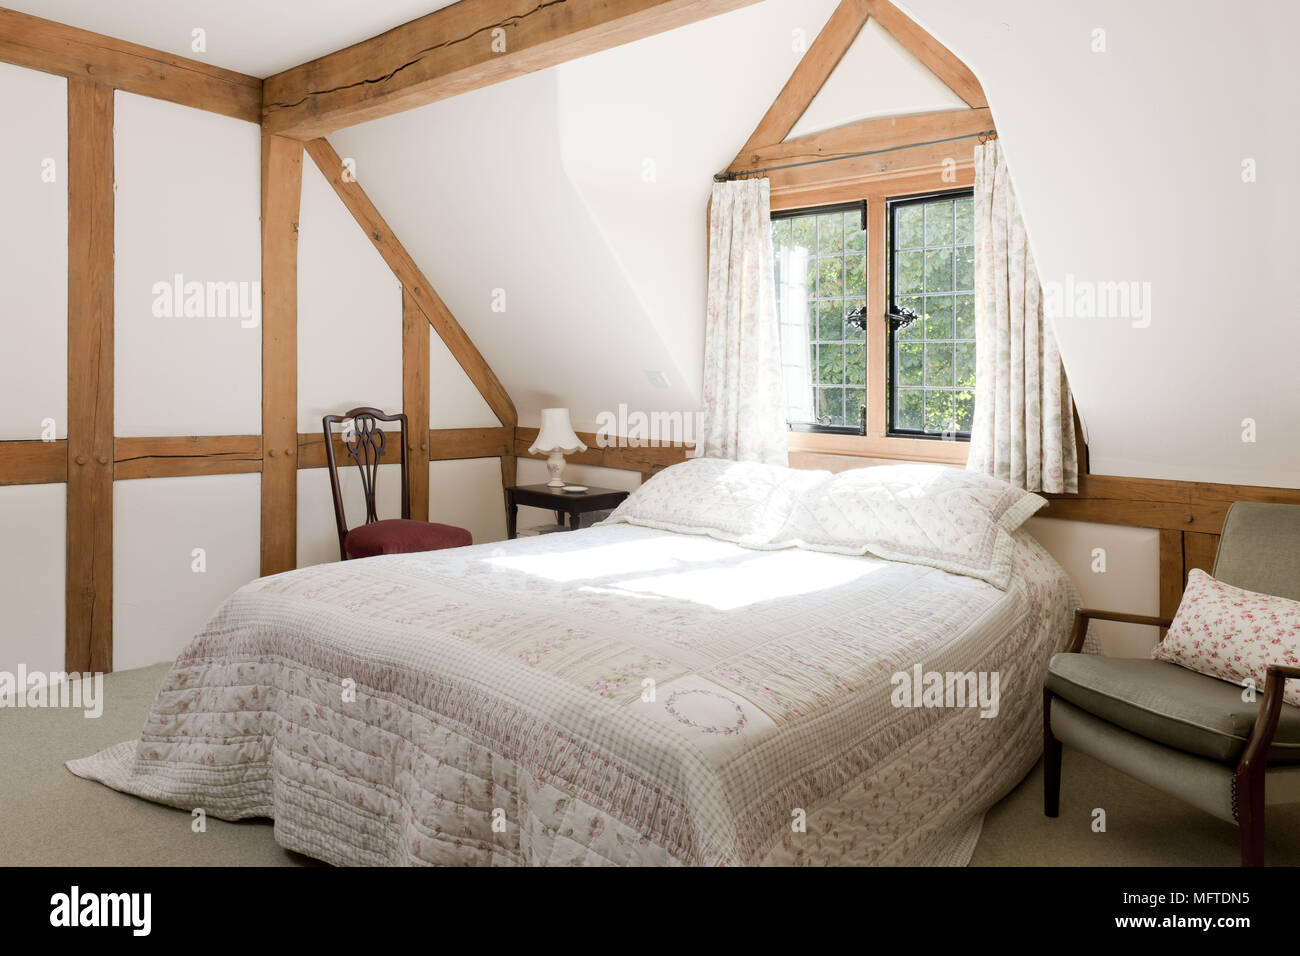 Double bed in white country style bedroom Stock Photo